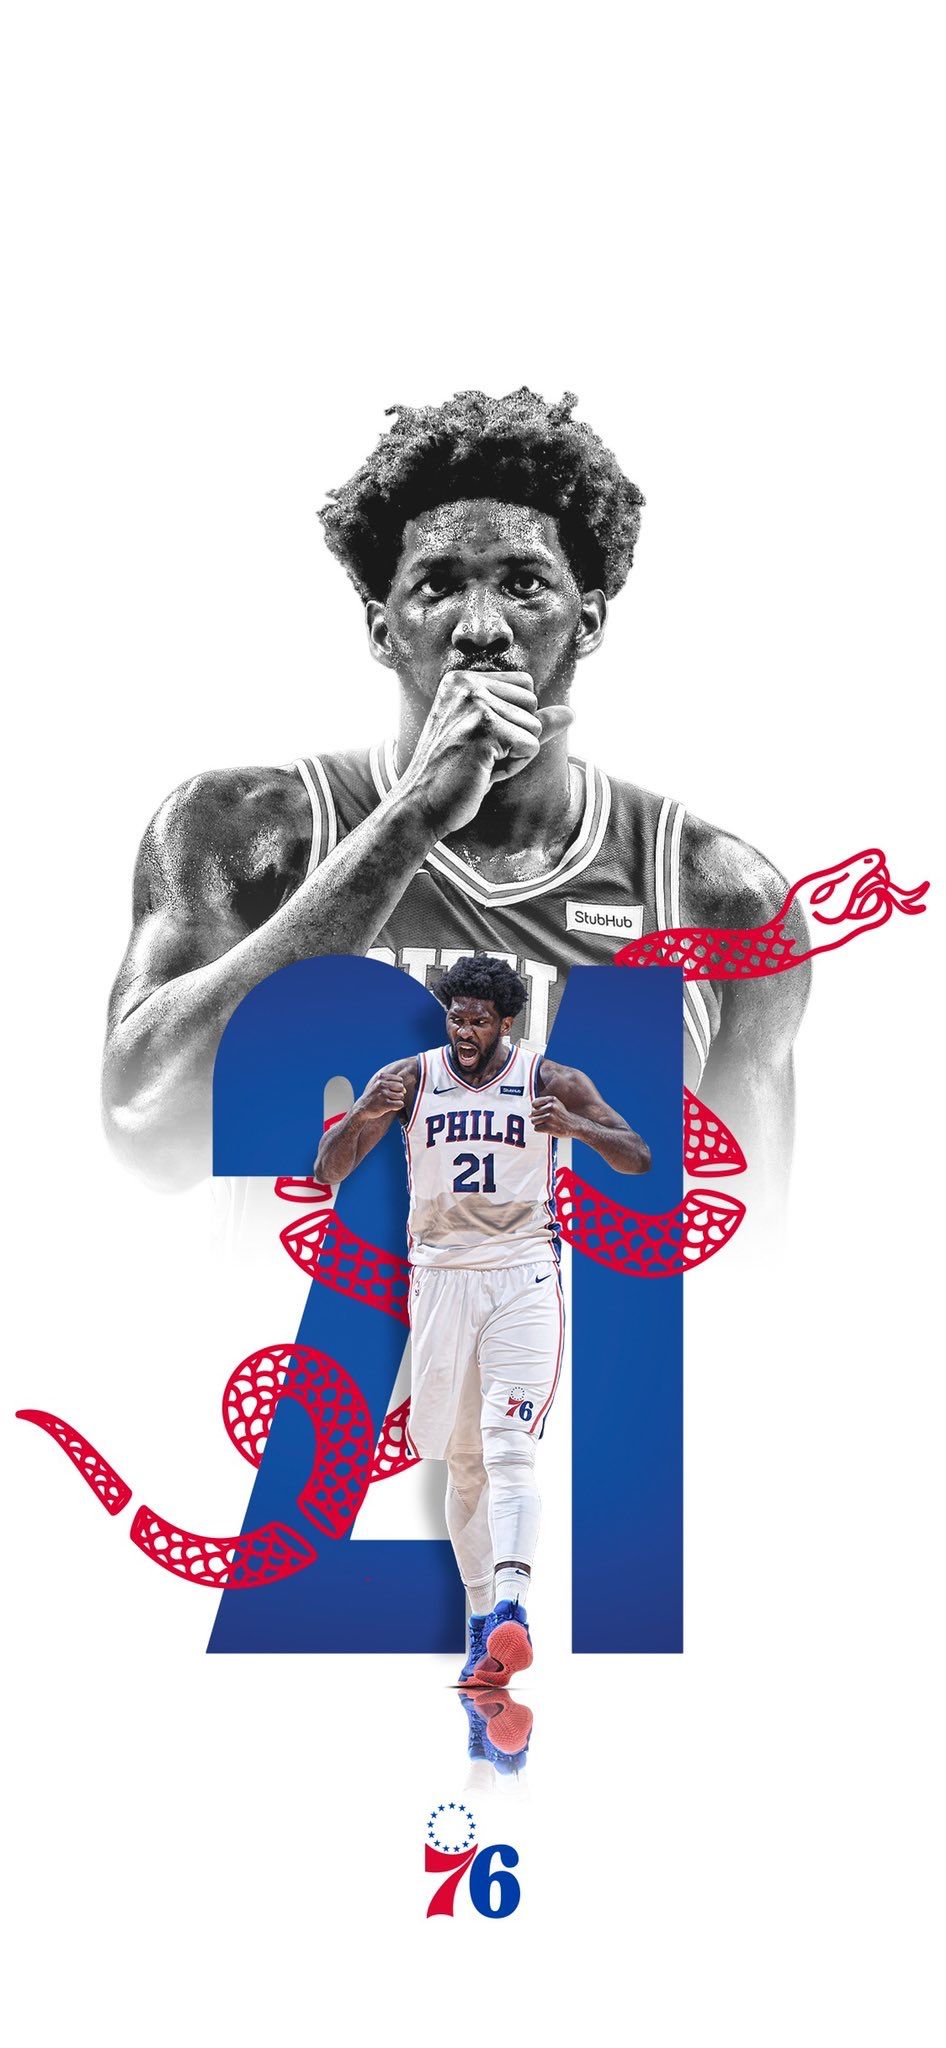 Download Philadelphia 76Ers wallpapers for mobile phone, free